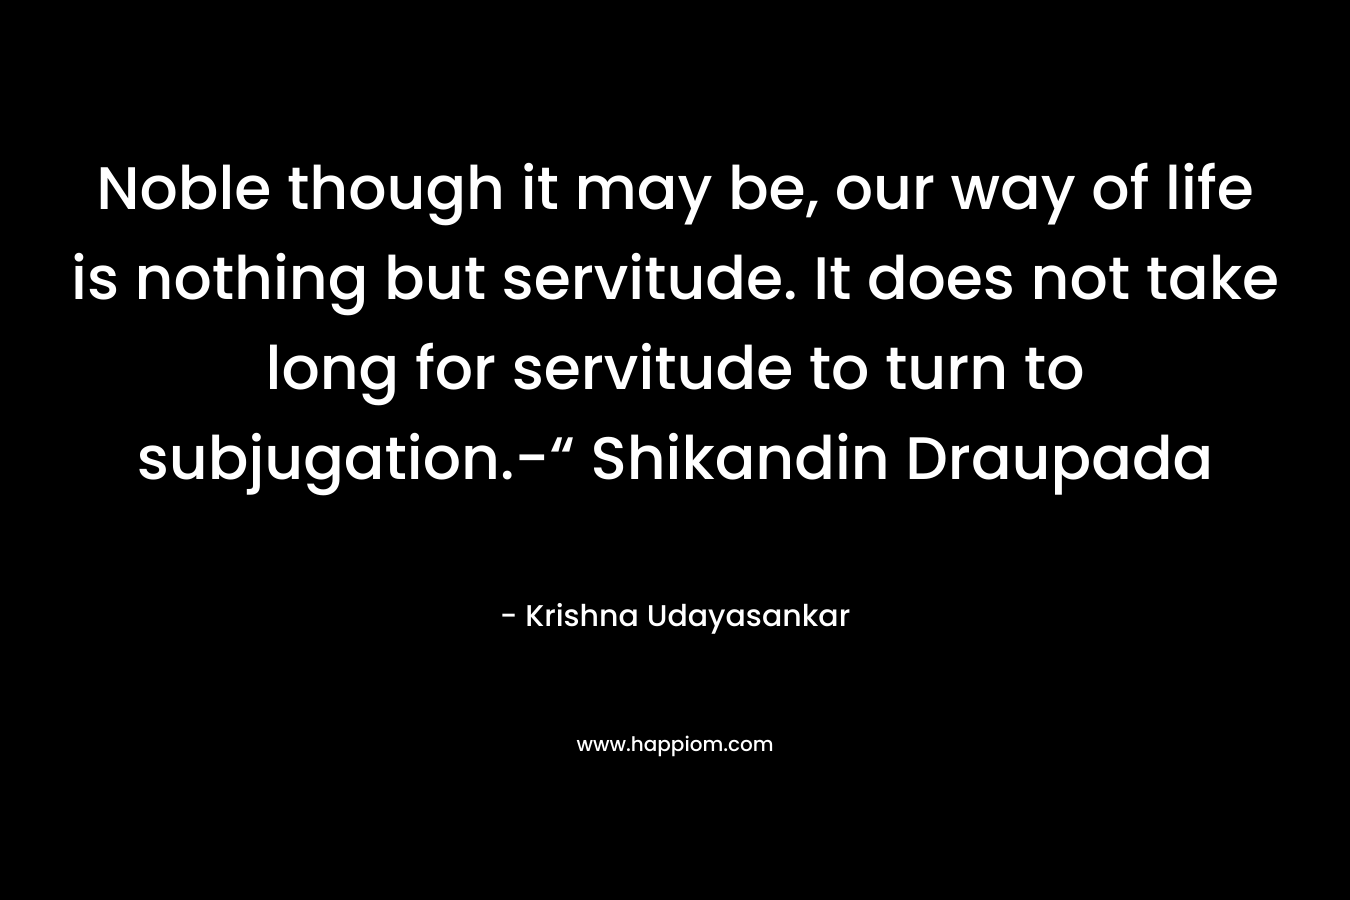 Noble though it may be, our way of life is nothing but servitude. It does not take long for servitude to turn to subjugation.-“ Shikandin Draupada – Krishna Udayasankar